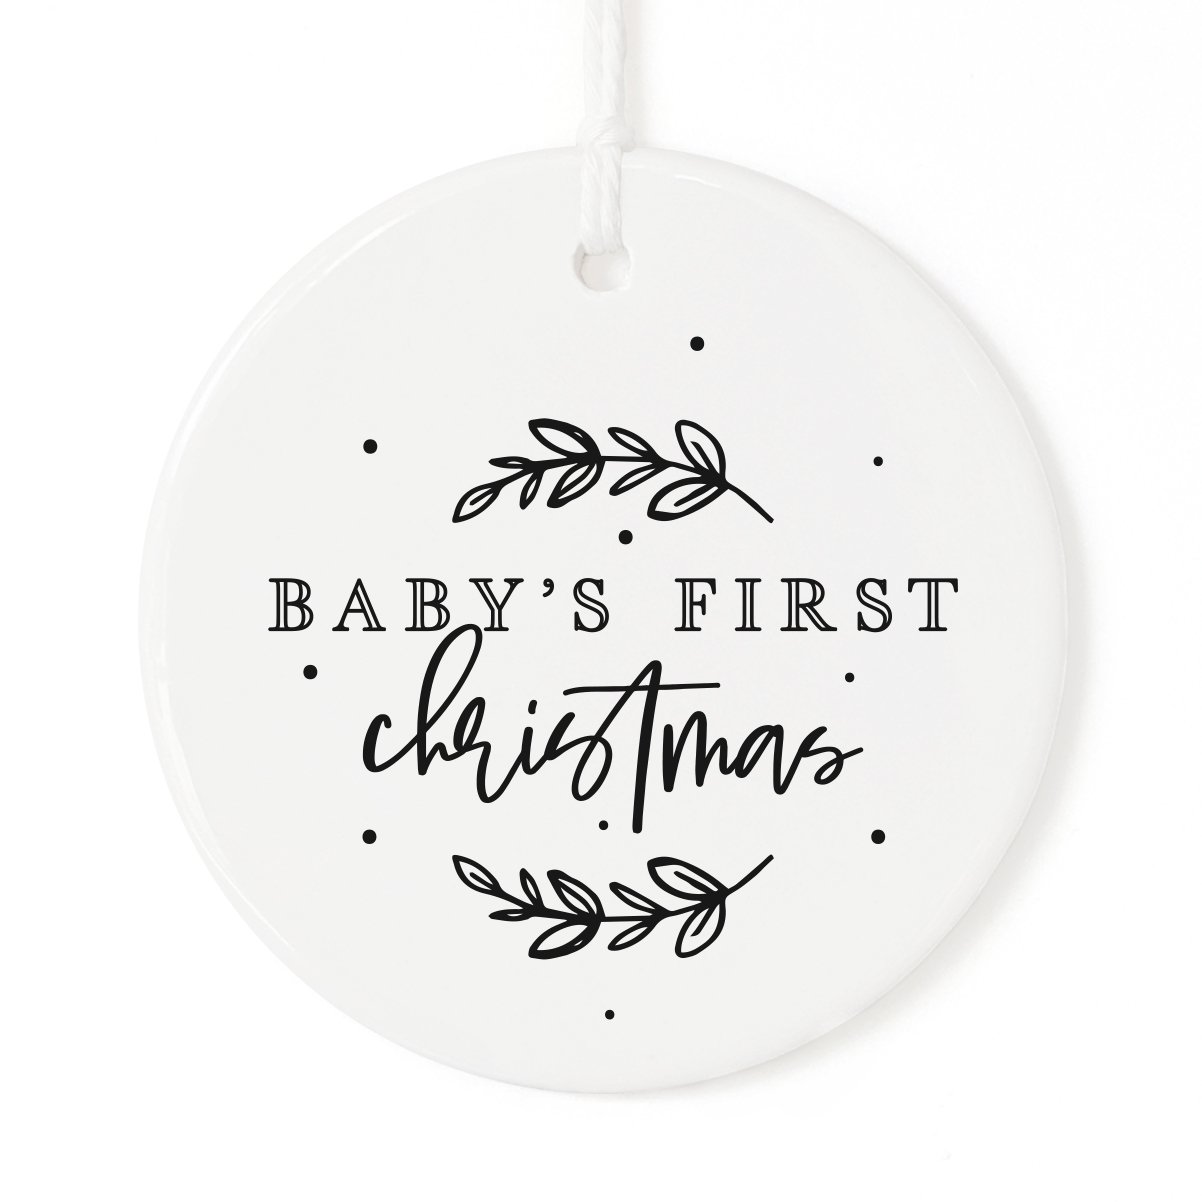 Baby's First Christmas Ornament - image 1 of 4